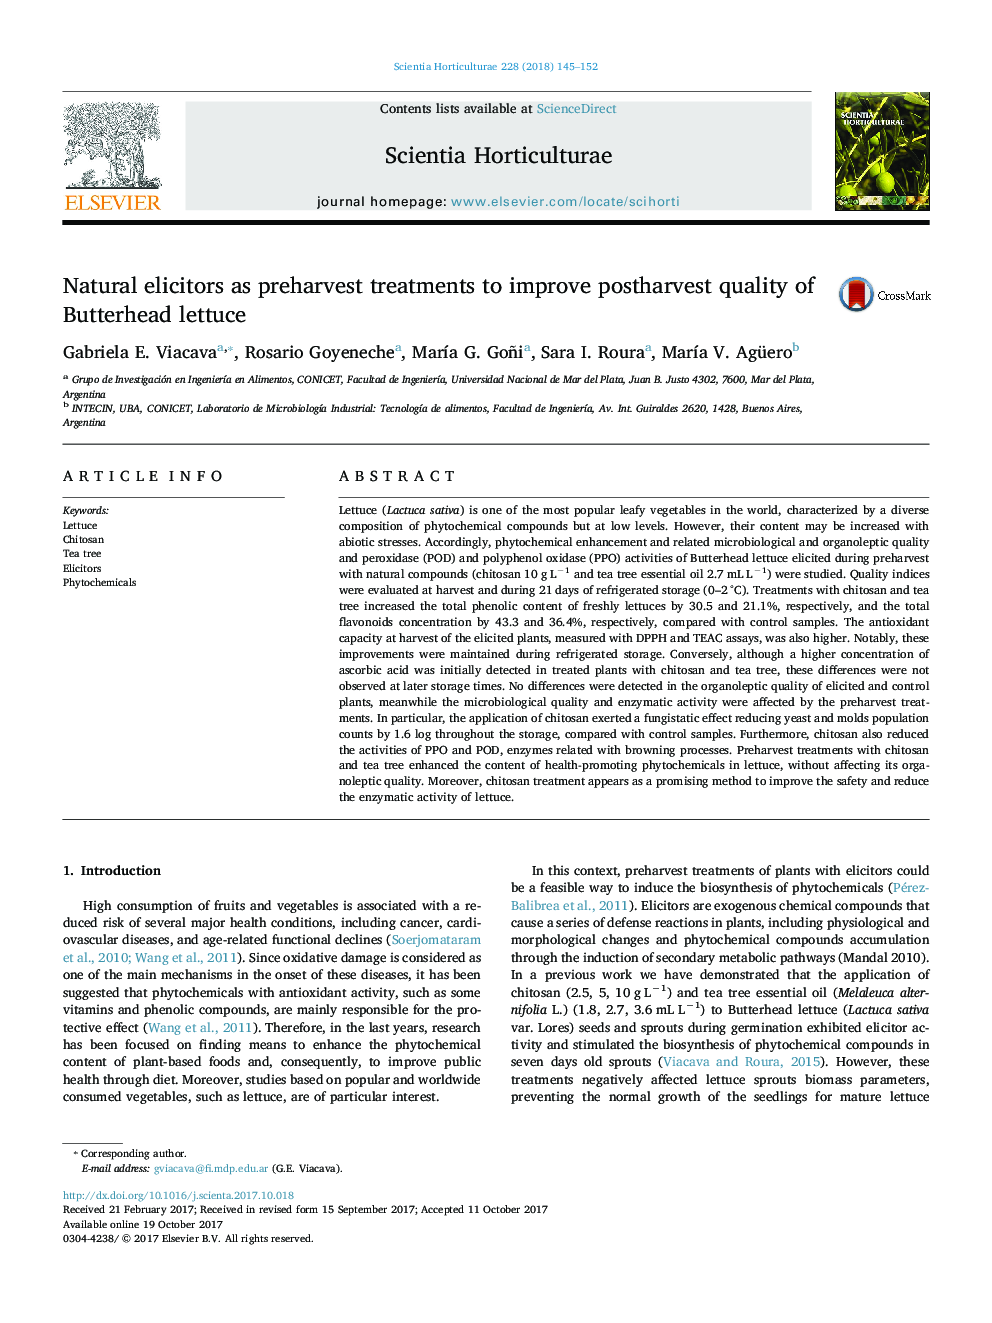 Natural elicitors as preharvest treatments to improve postharvest quality of Butterhead lettuce